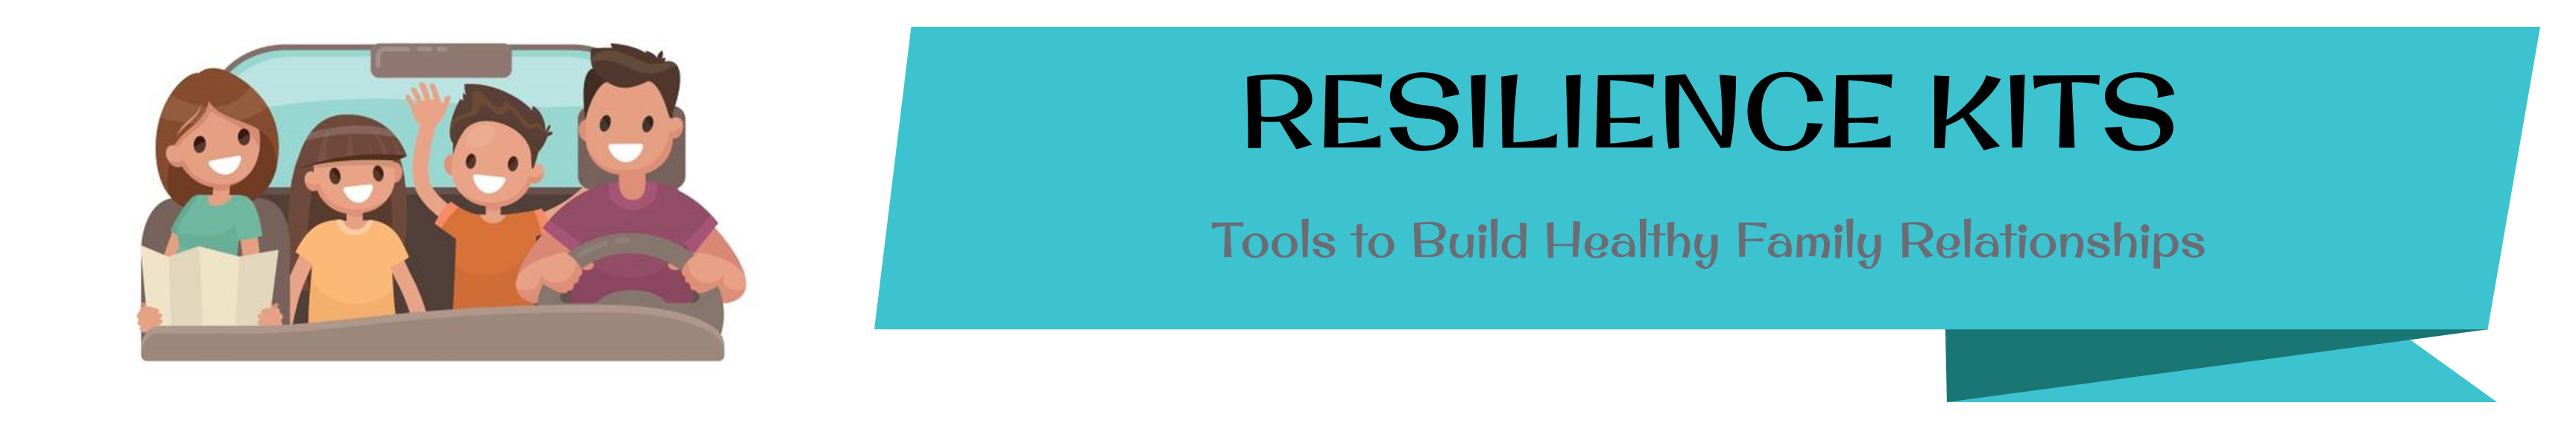 Resilience Kits: Tools to Build Healthy Family Relationships